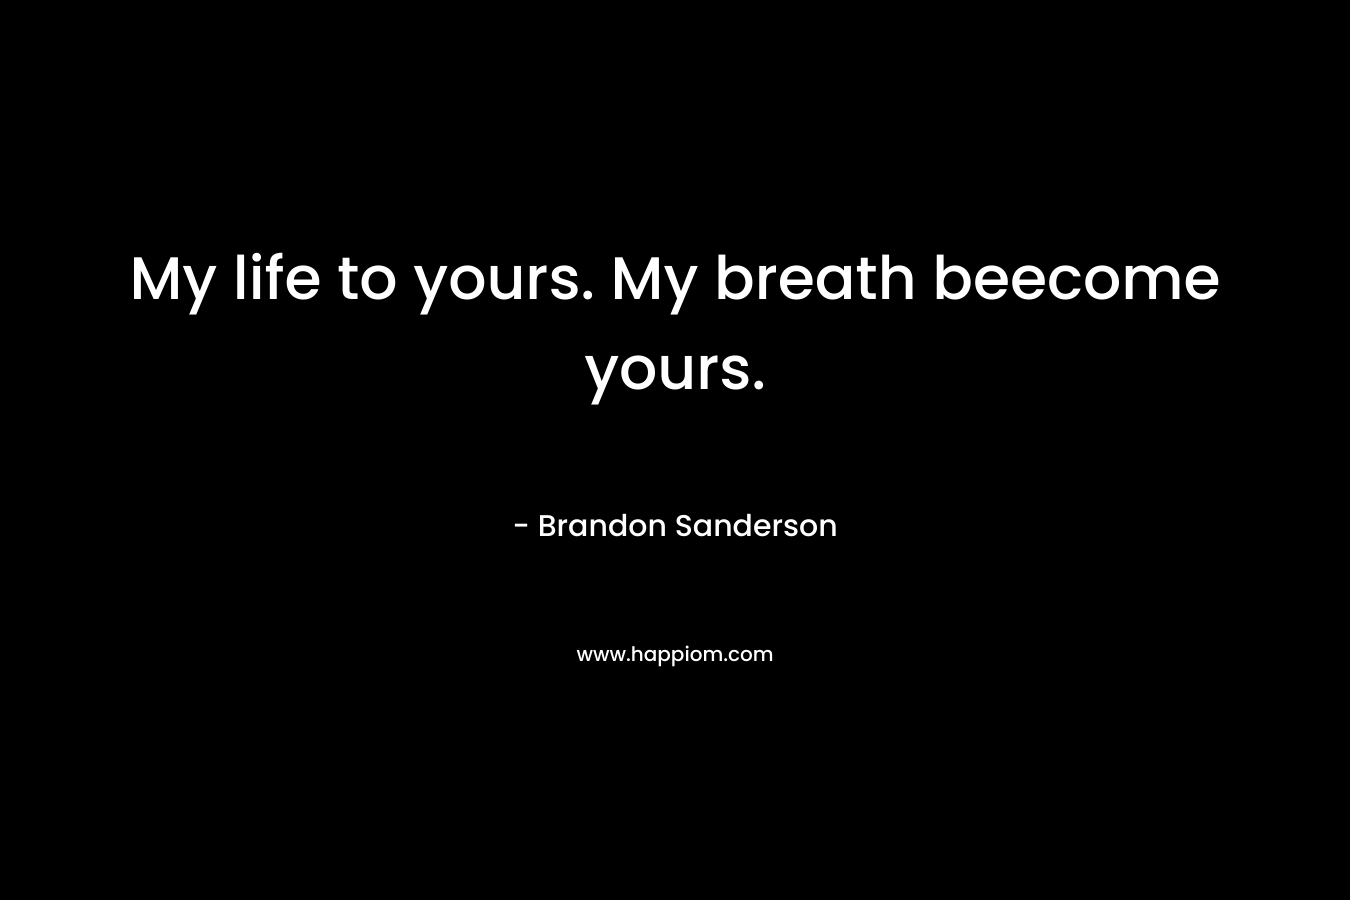 My life to yours. My breath beecome yours.